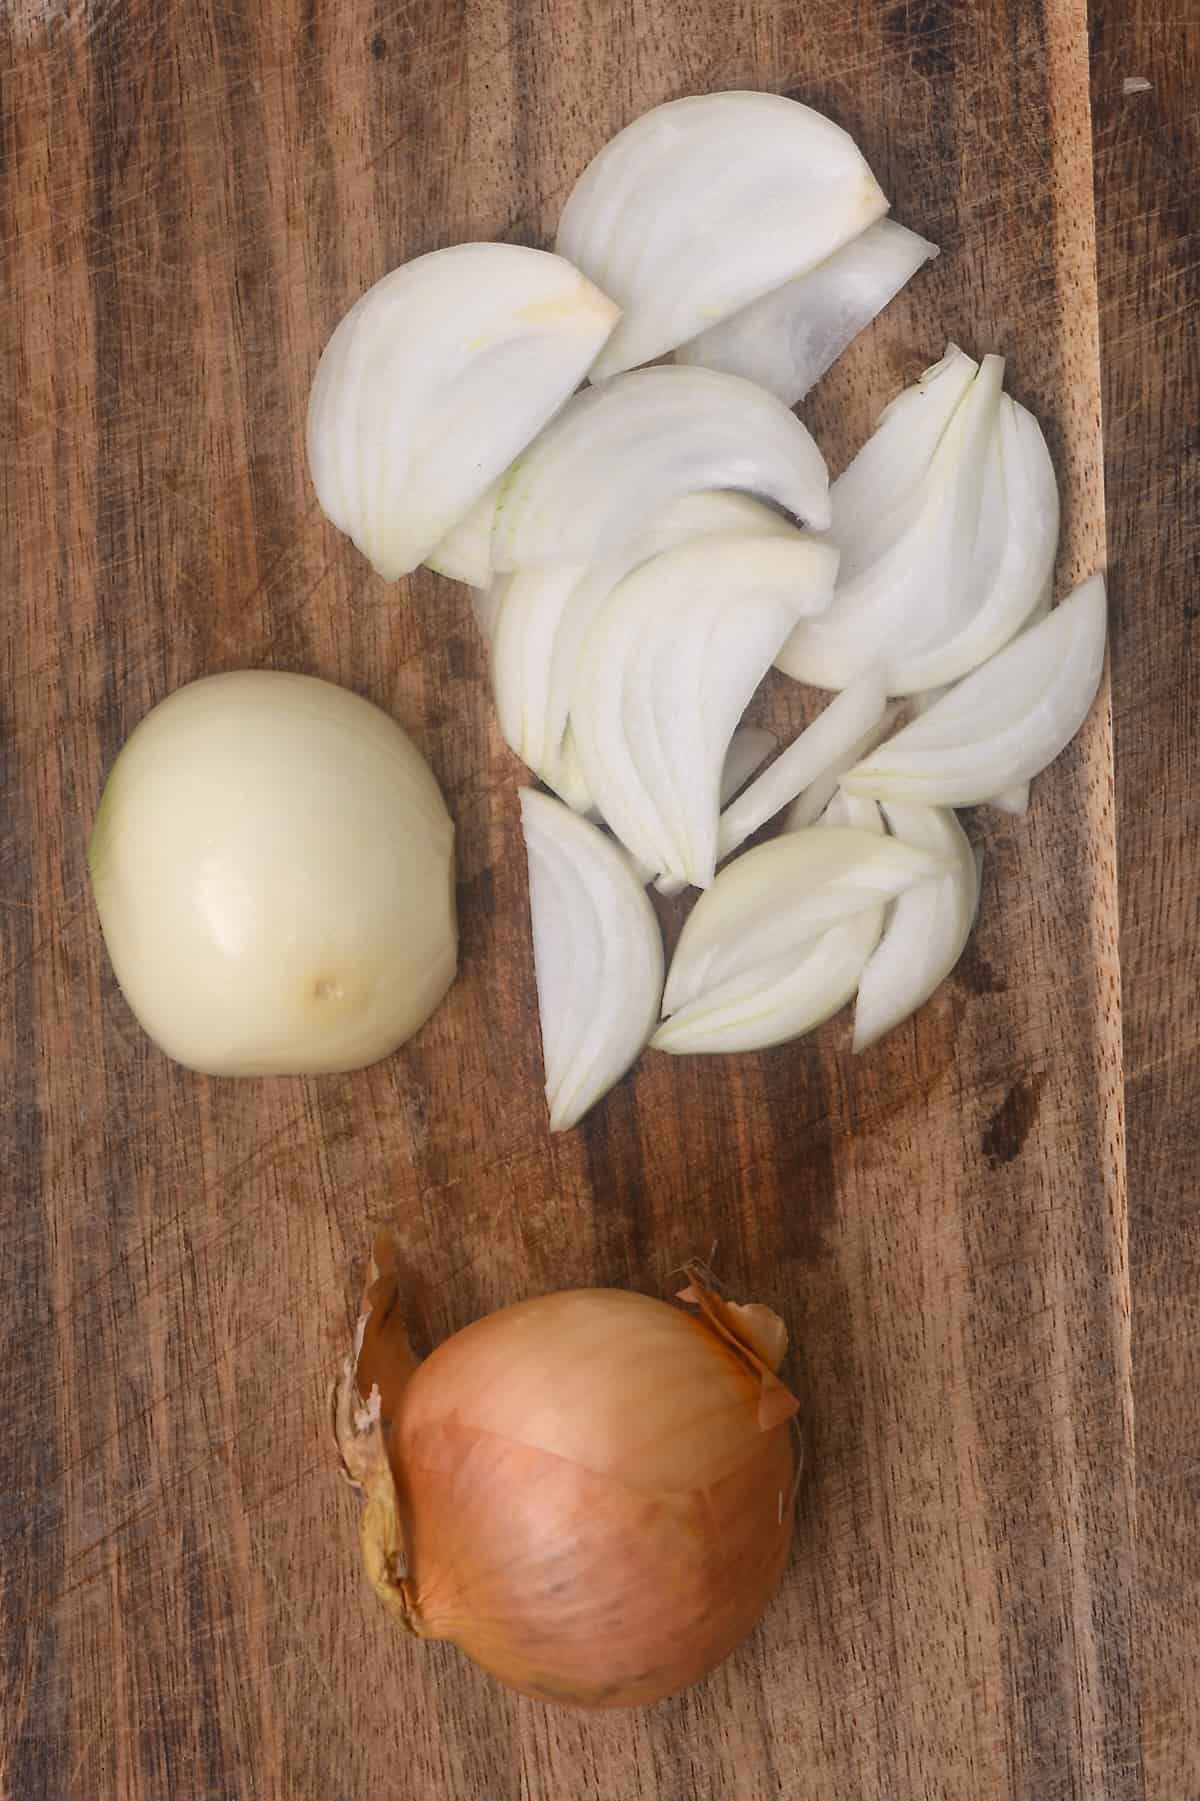 Thinly sliced onion